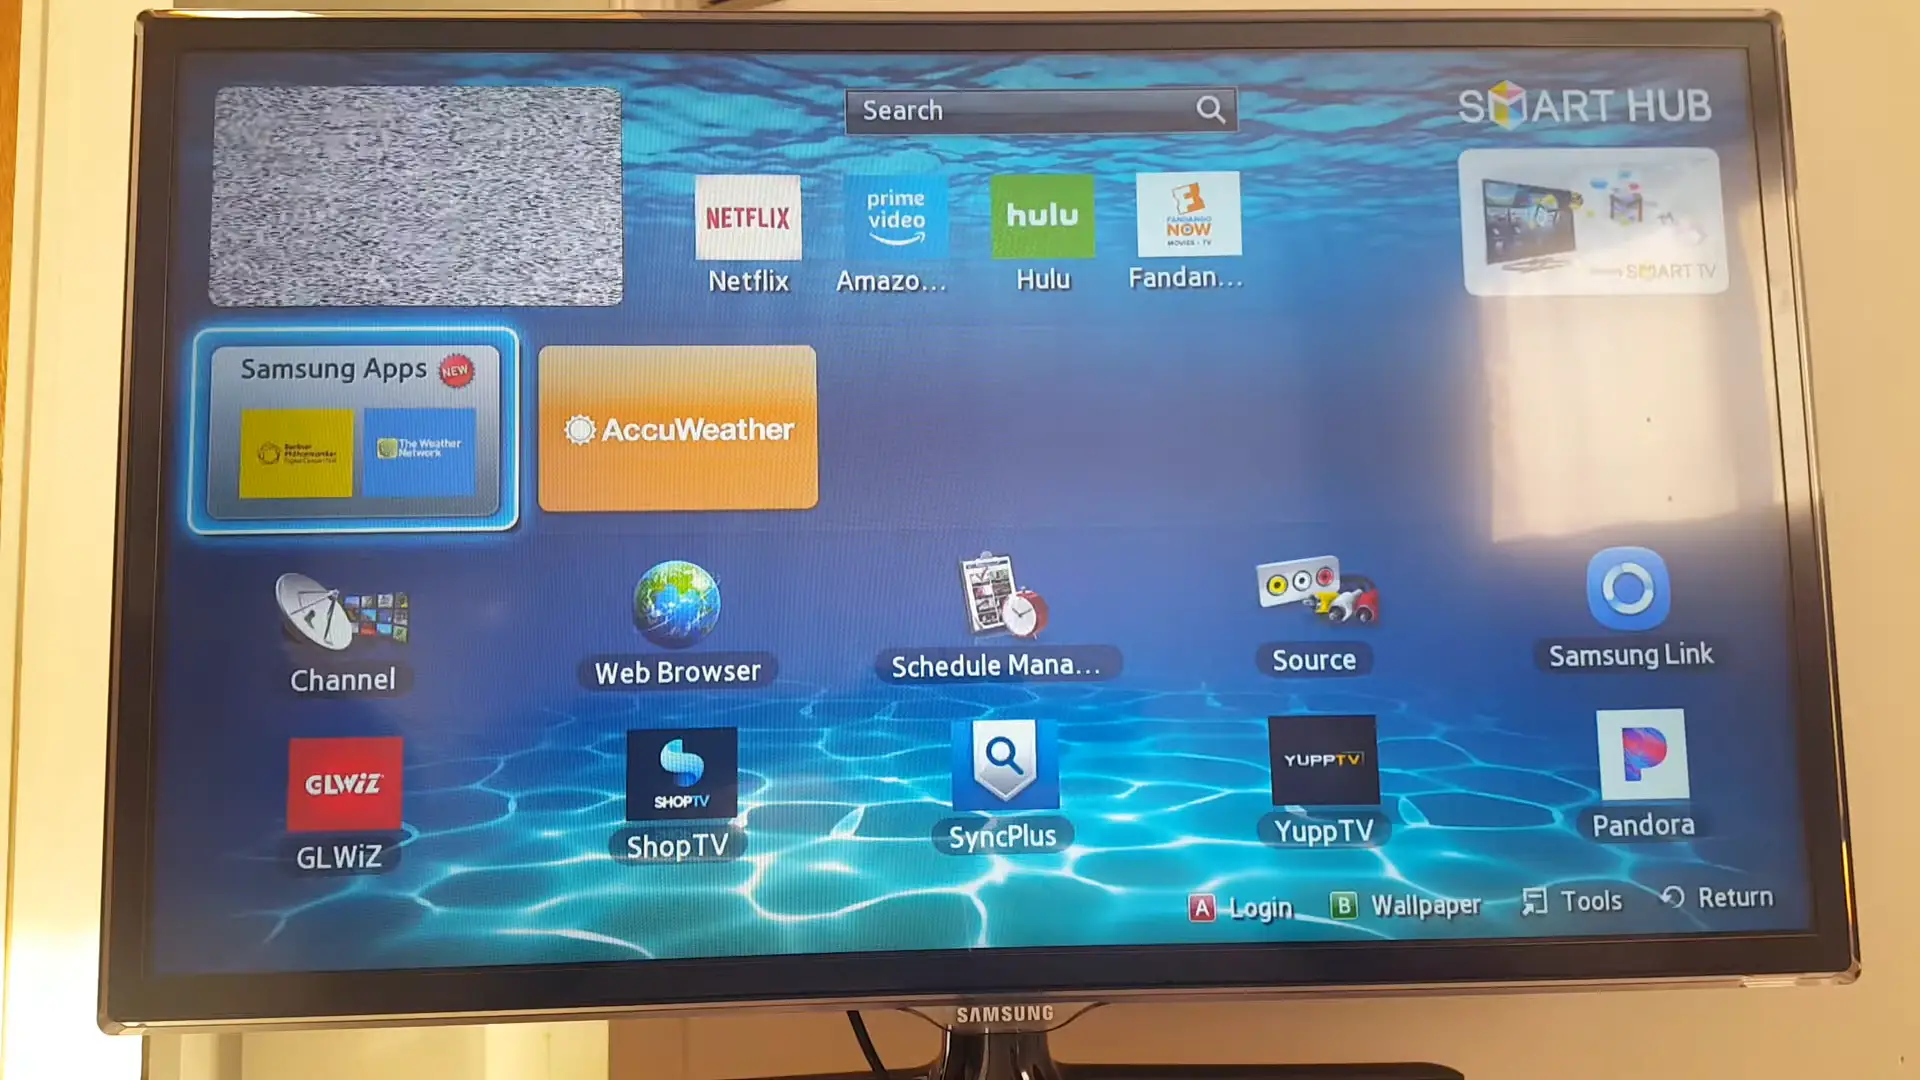 Overview of a Samsung Smart TV